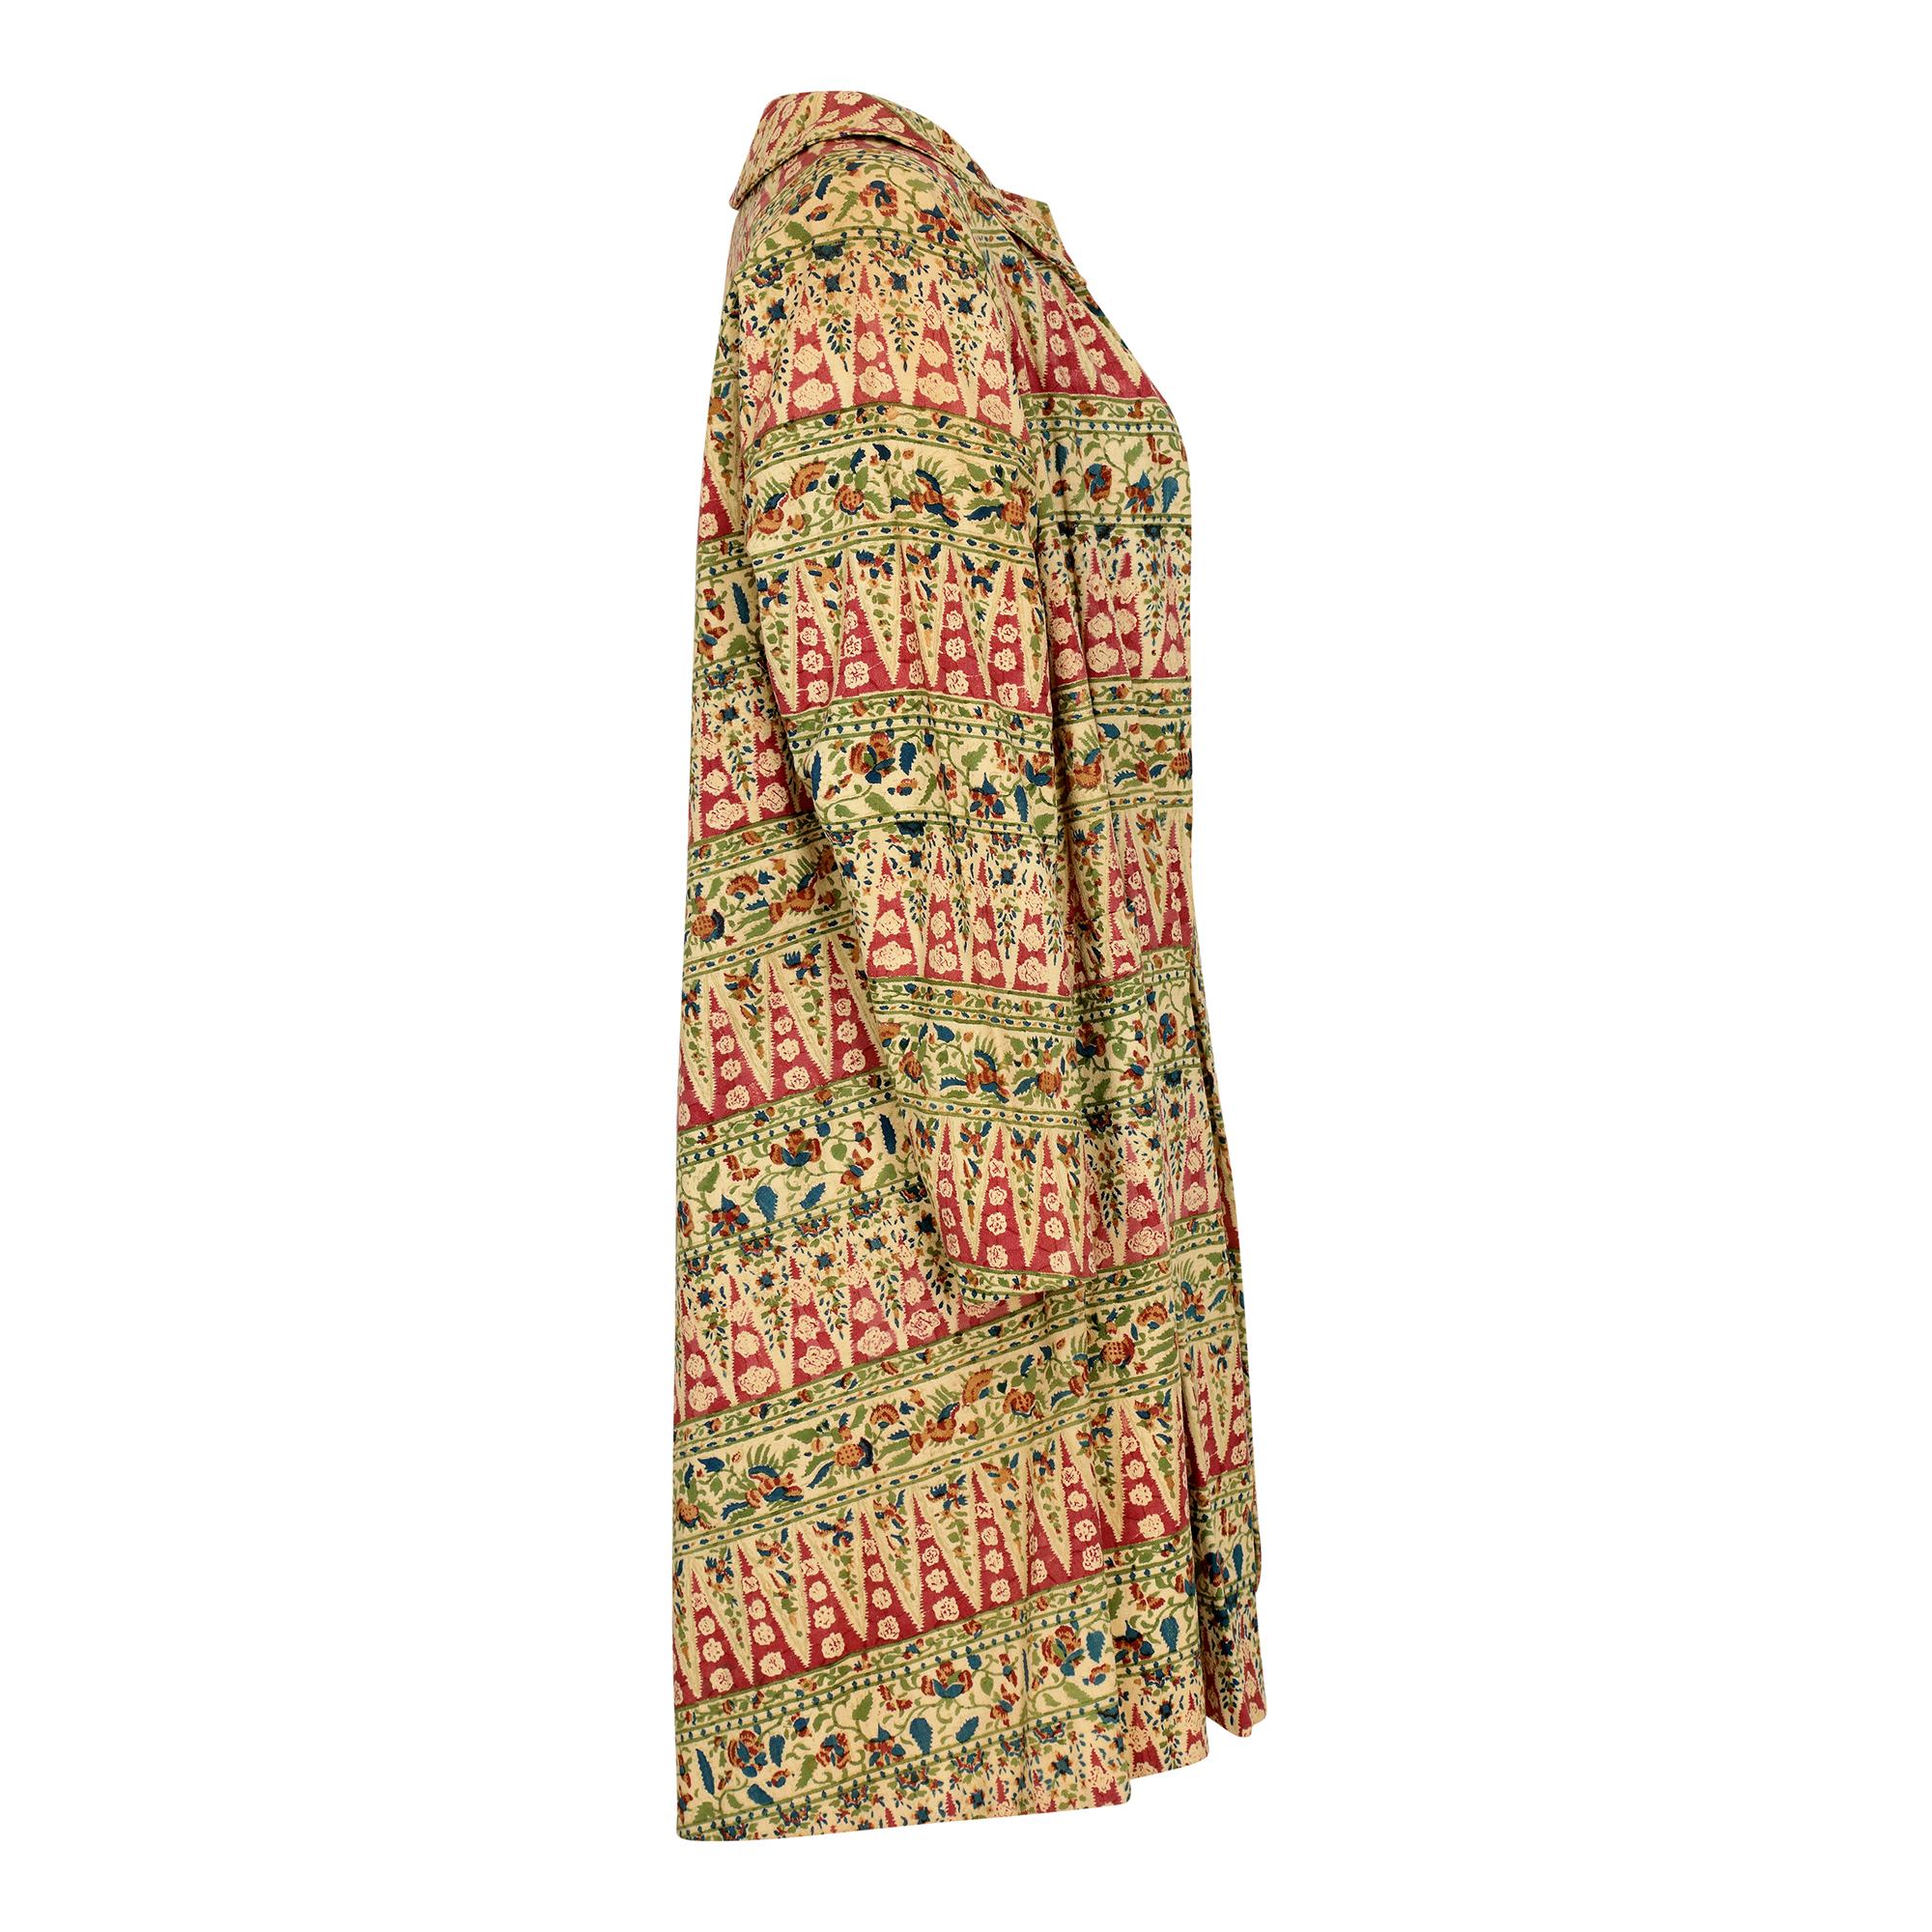 This is a really unusual jacket of its time - an early ethnic style block print. We have only ever seen these duster coats as a solid colour and in a more formal style as part of dress suit. This design is very open and features a high button Peter